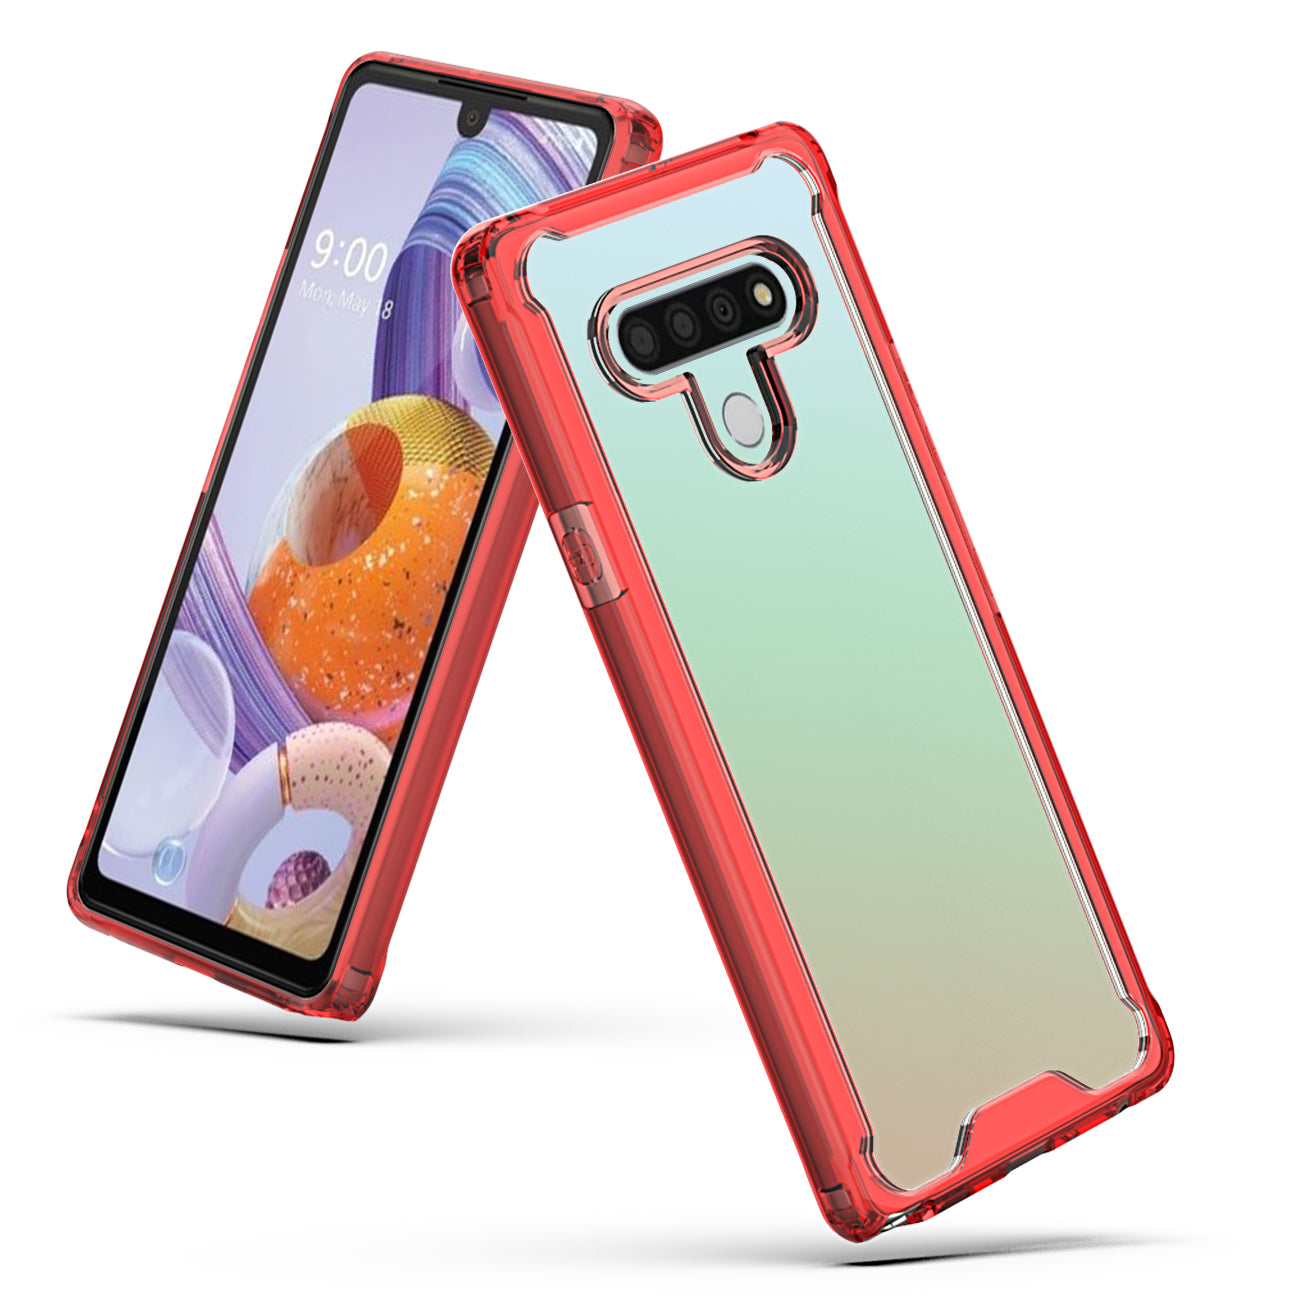 Case Bumper PC And TPU Clear High Quality LG STYLO 6 Red Color